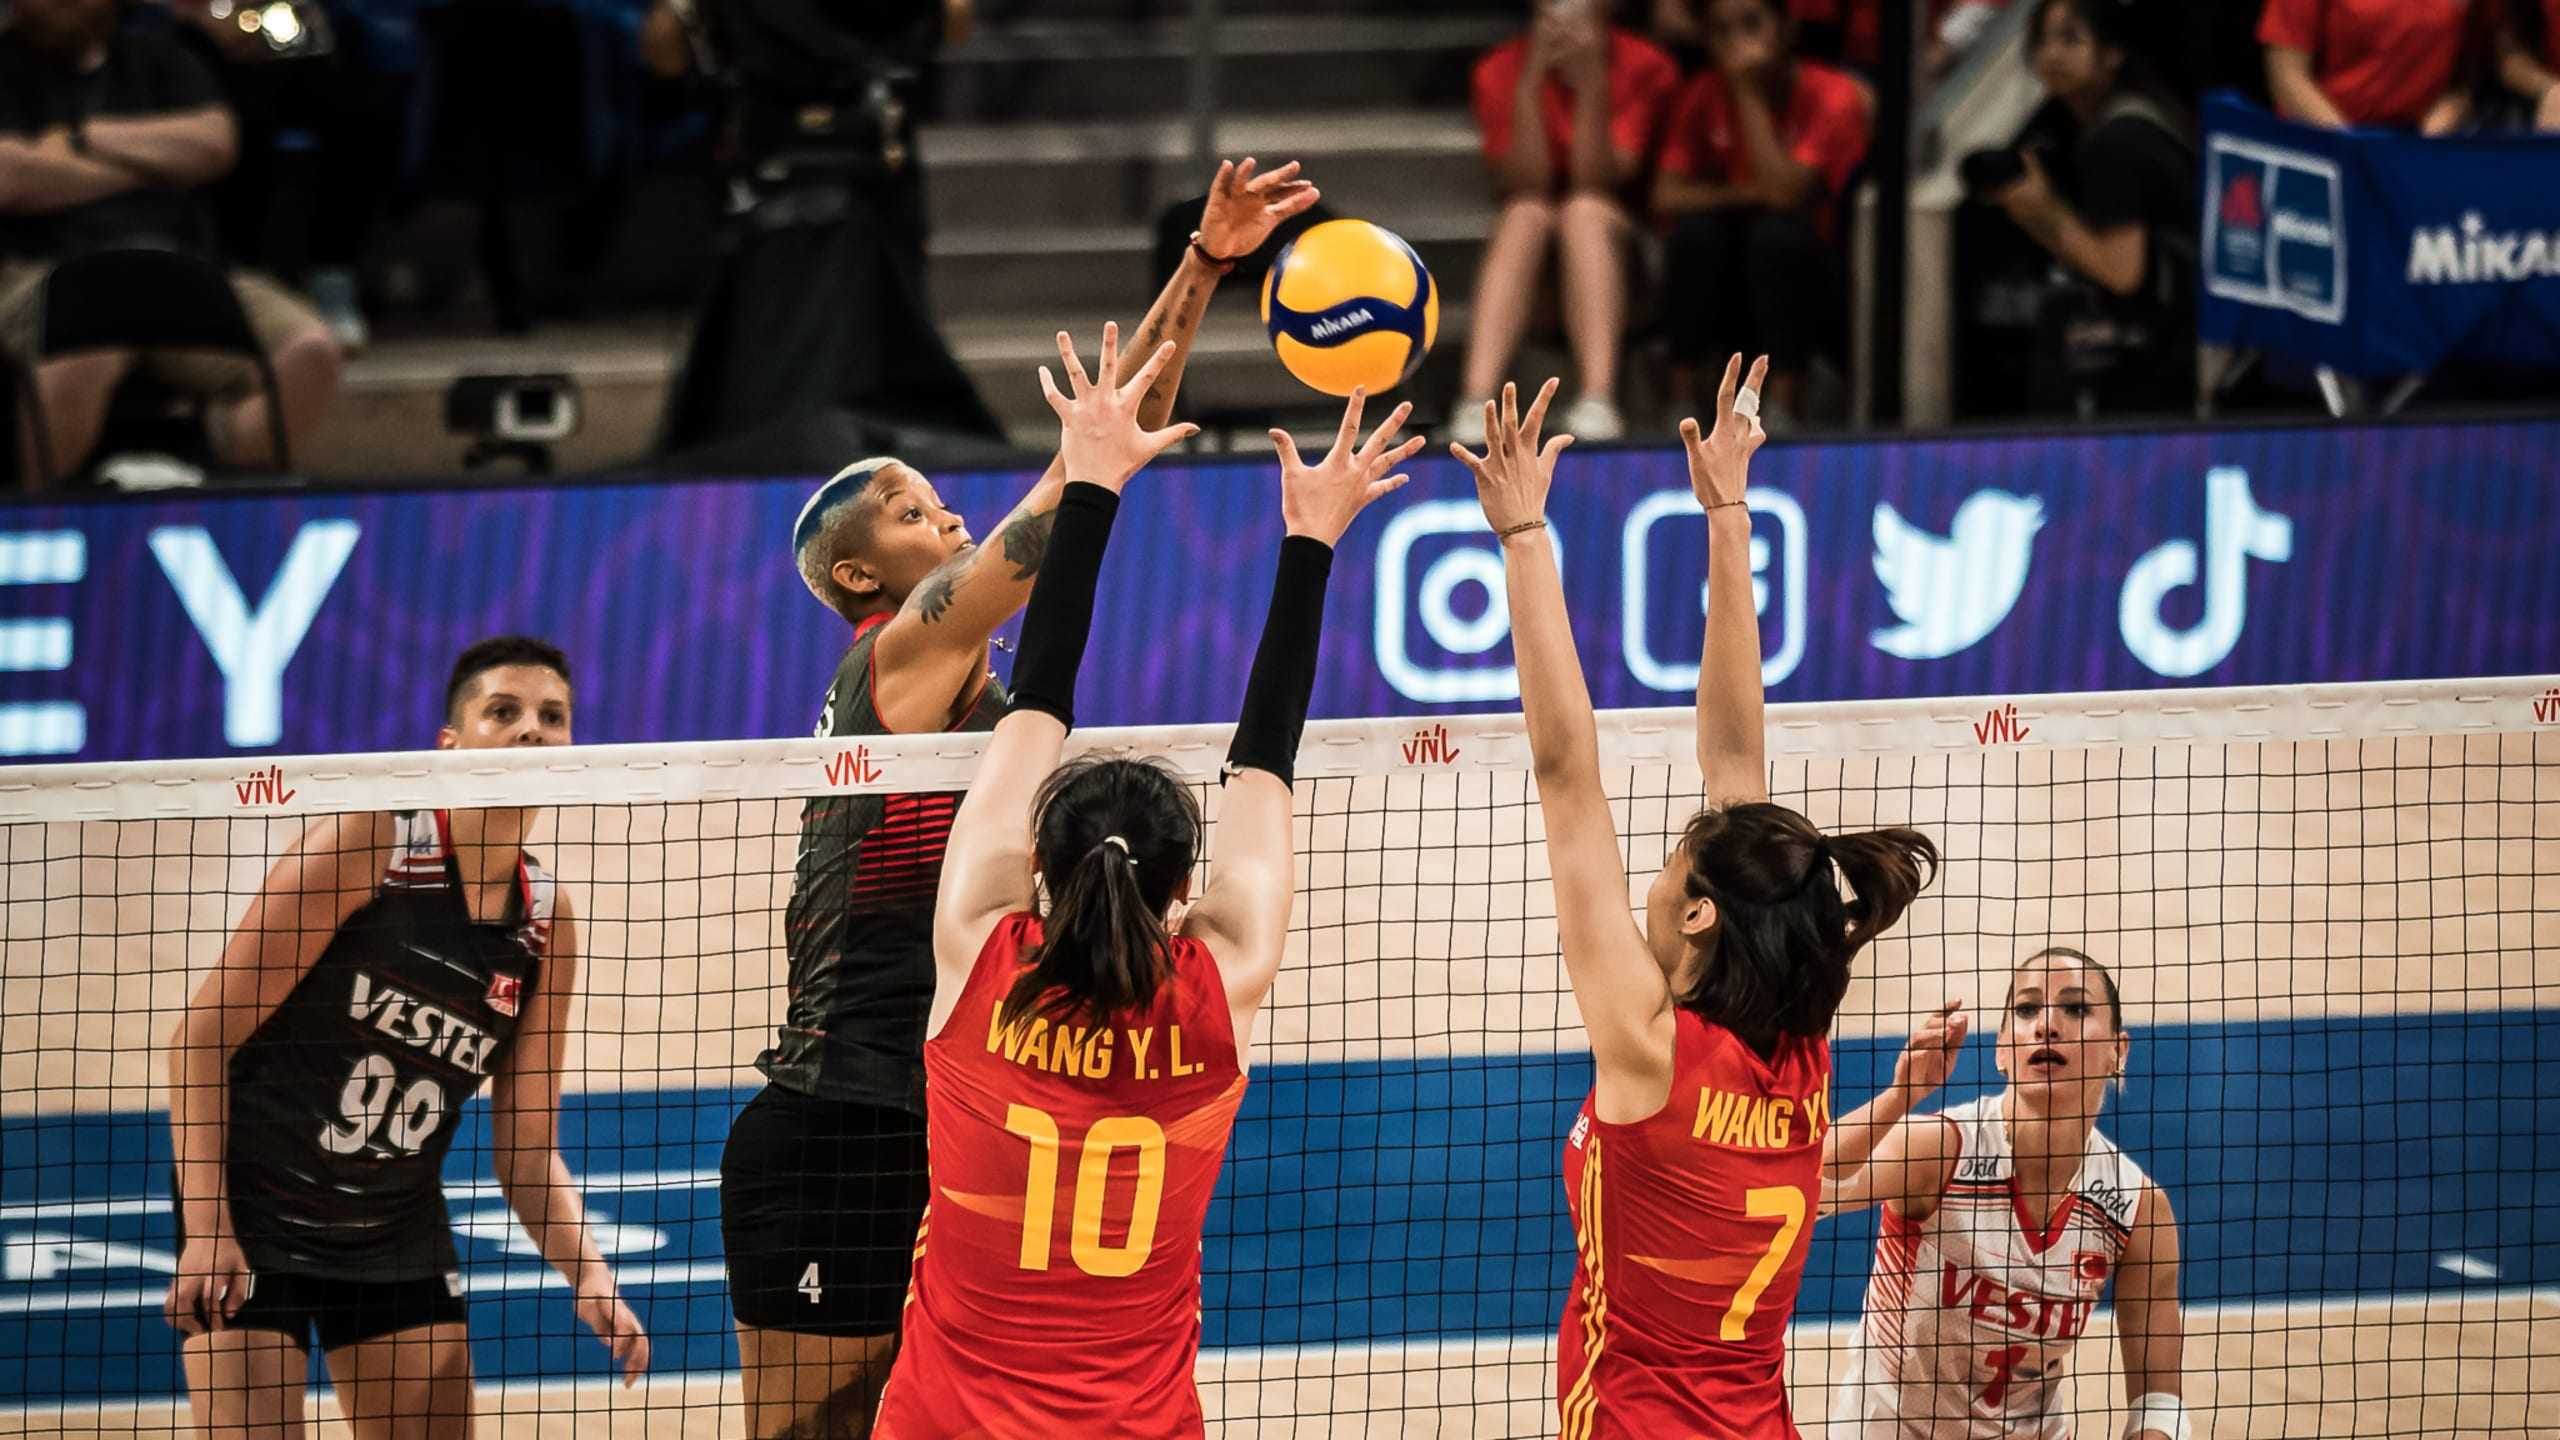 Melissa Vargas of Turkey (centre) overcomes the Chinese block during the final. Photo: Volleyball Nations League
